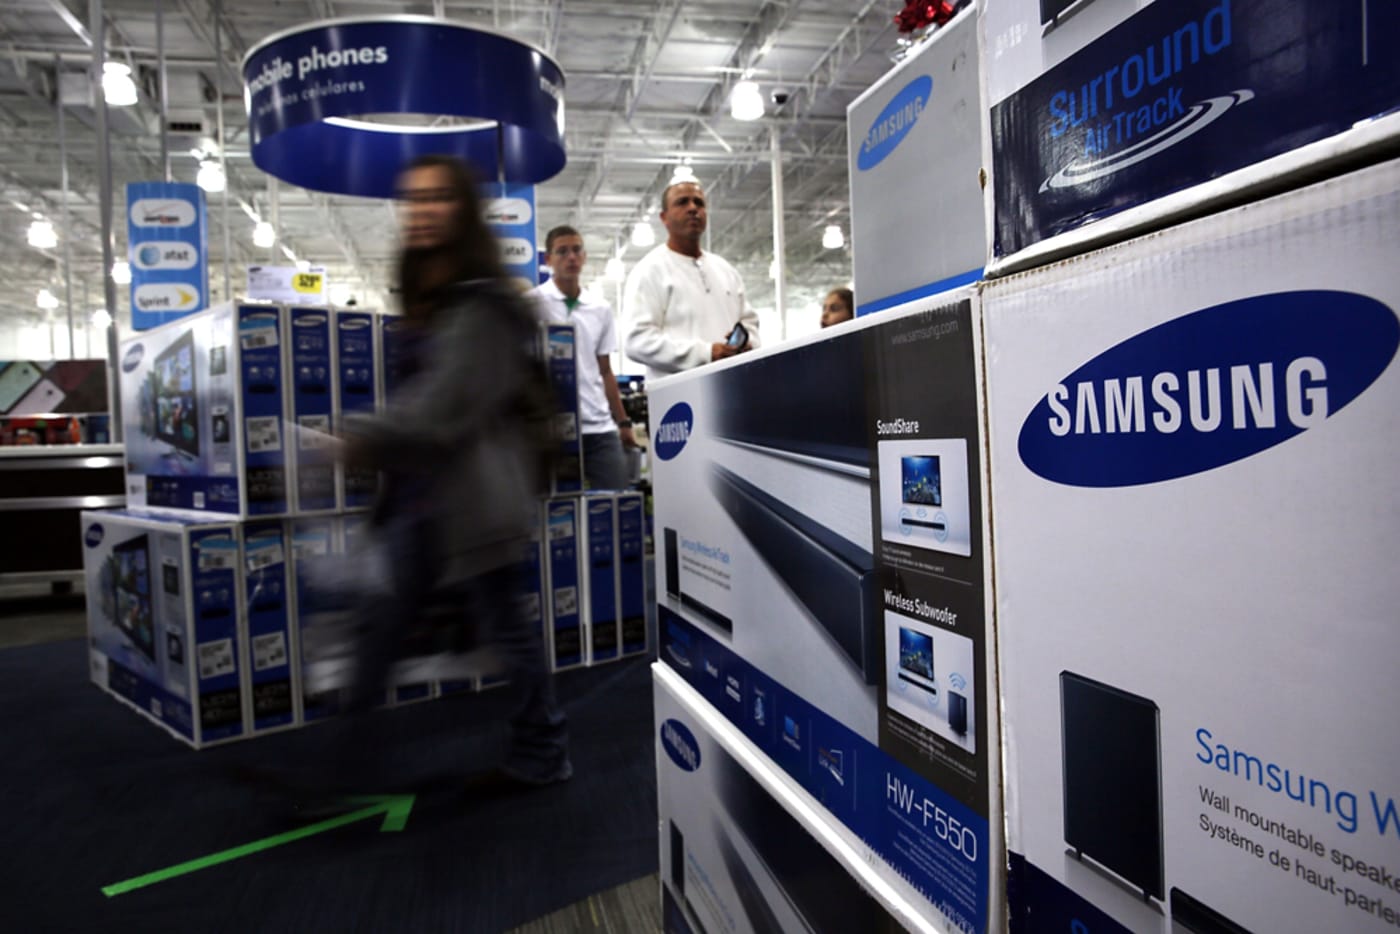 Black Friday 2021 shoppers looks for deals at a Best Buy store